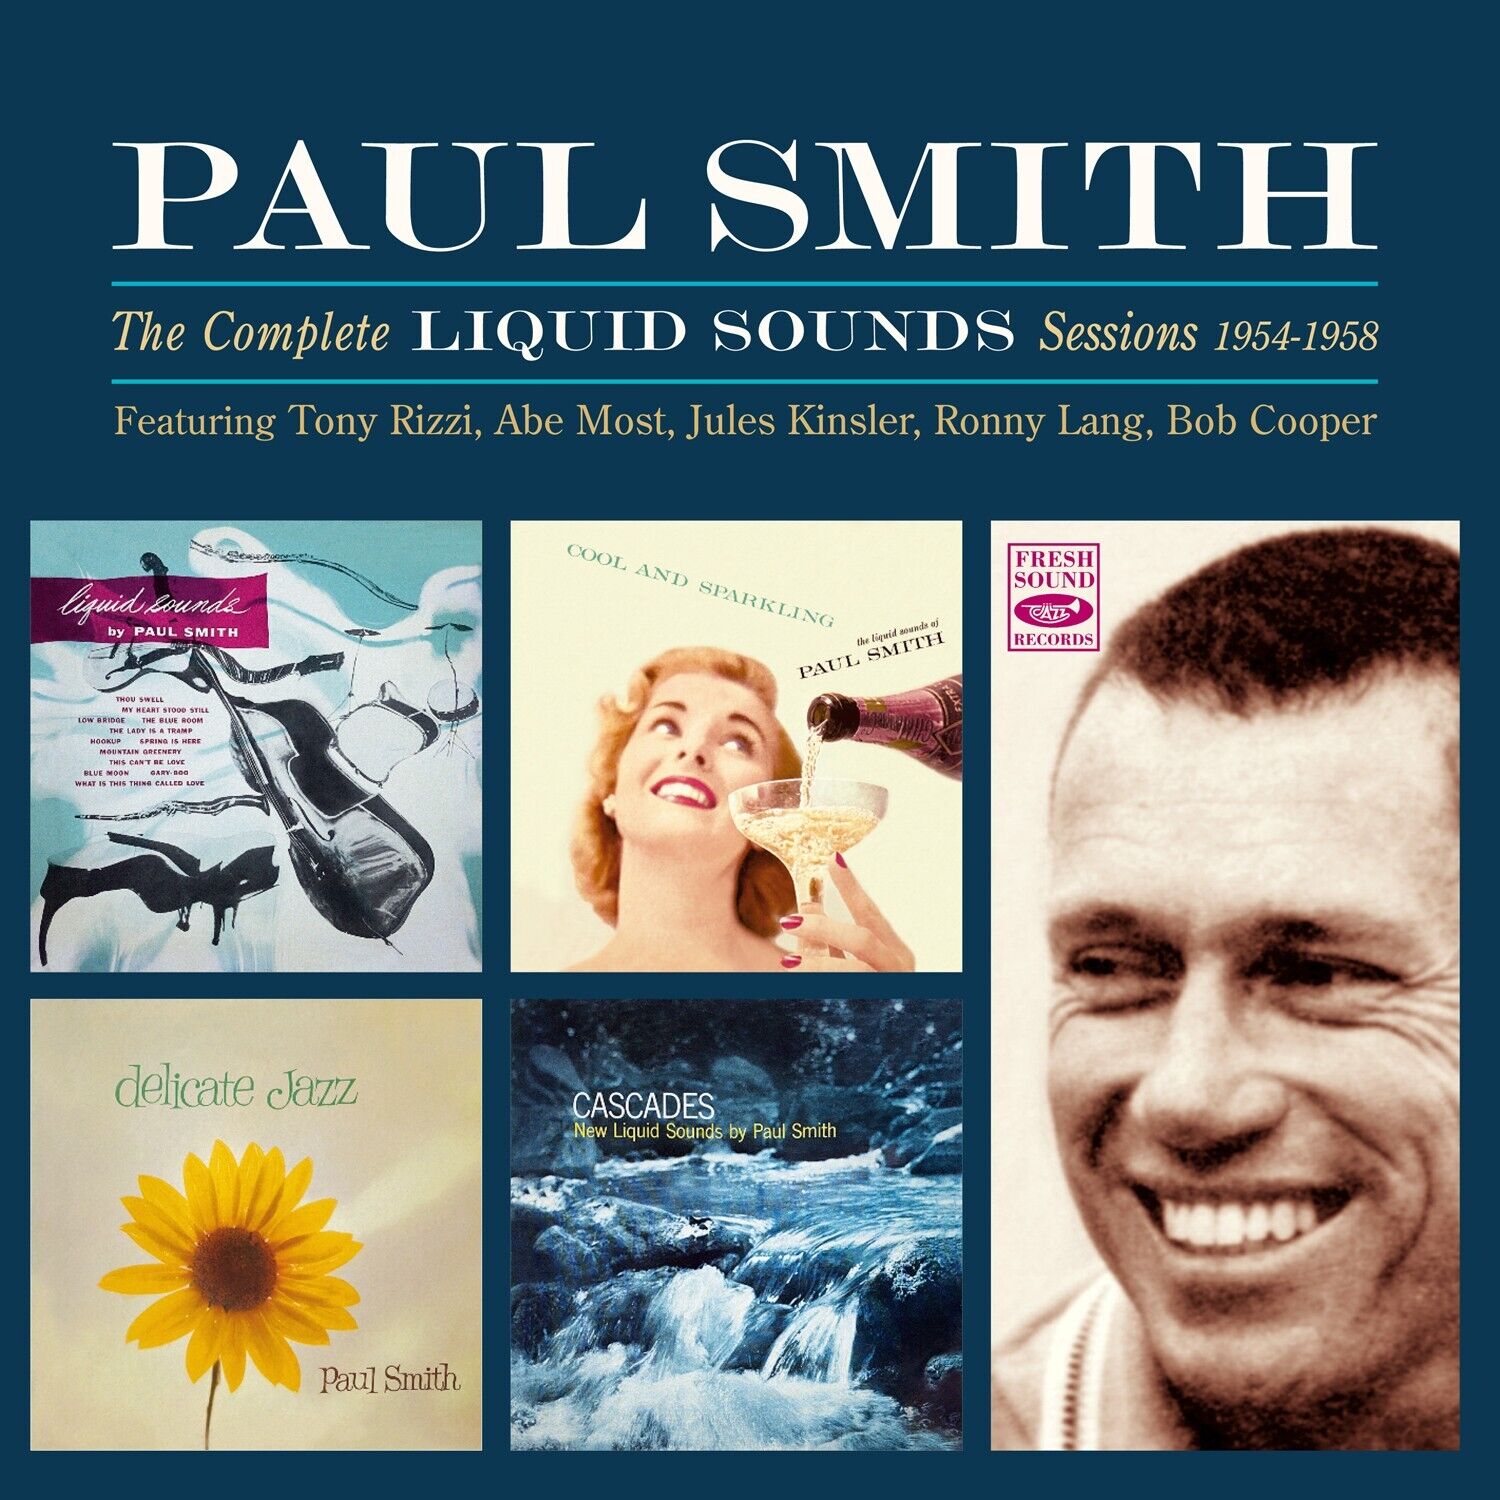 Paul Smith The Complete Liquid Sounds Sessions 1954-1958 (4 LP On 2 CD)